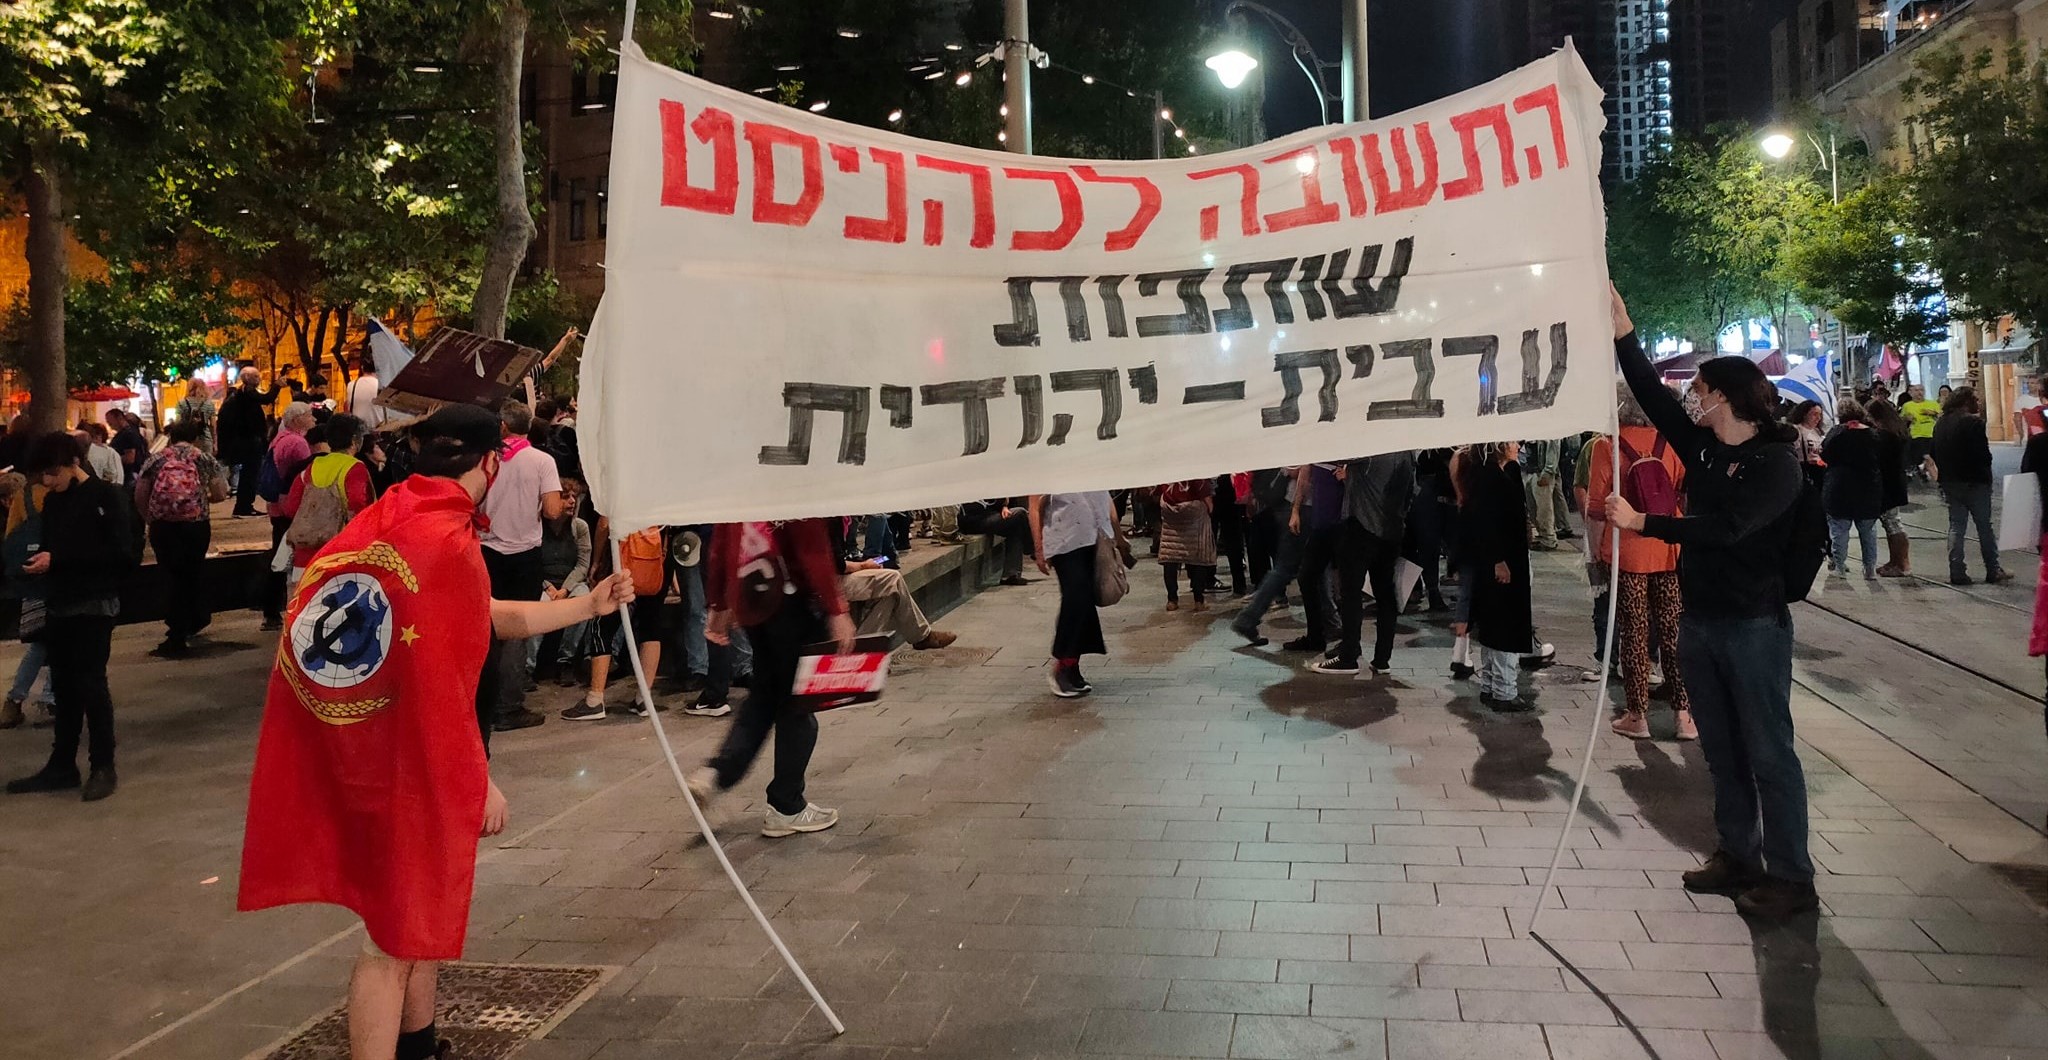 Young Communists demonstrate in West Jerusalem, Saturday night, April 24, 2021. The banner reads: "The answer to Cahanism is Arab-Jewish partnership."